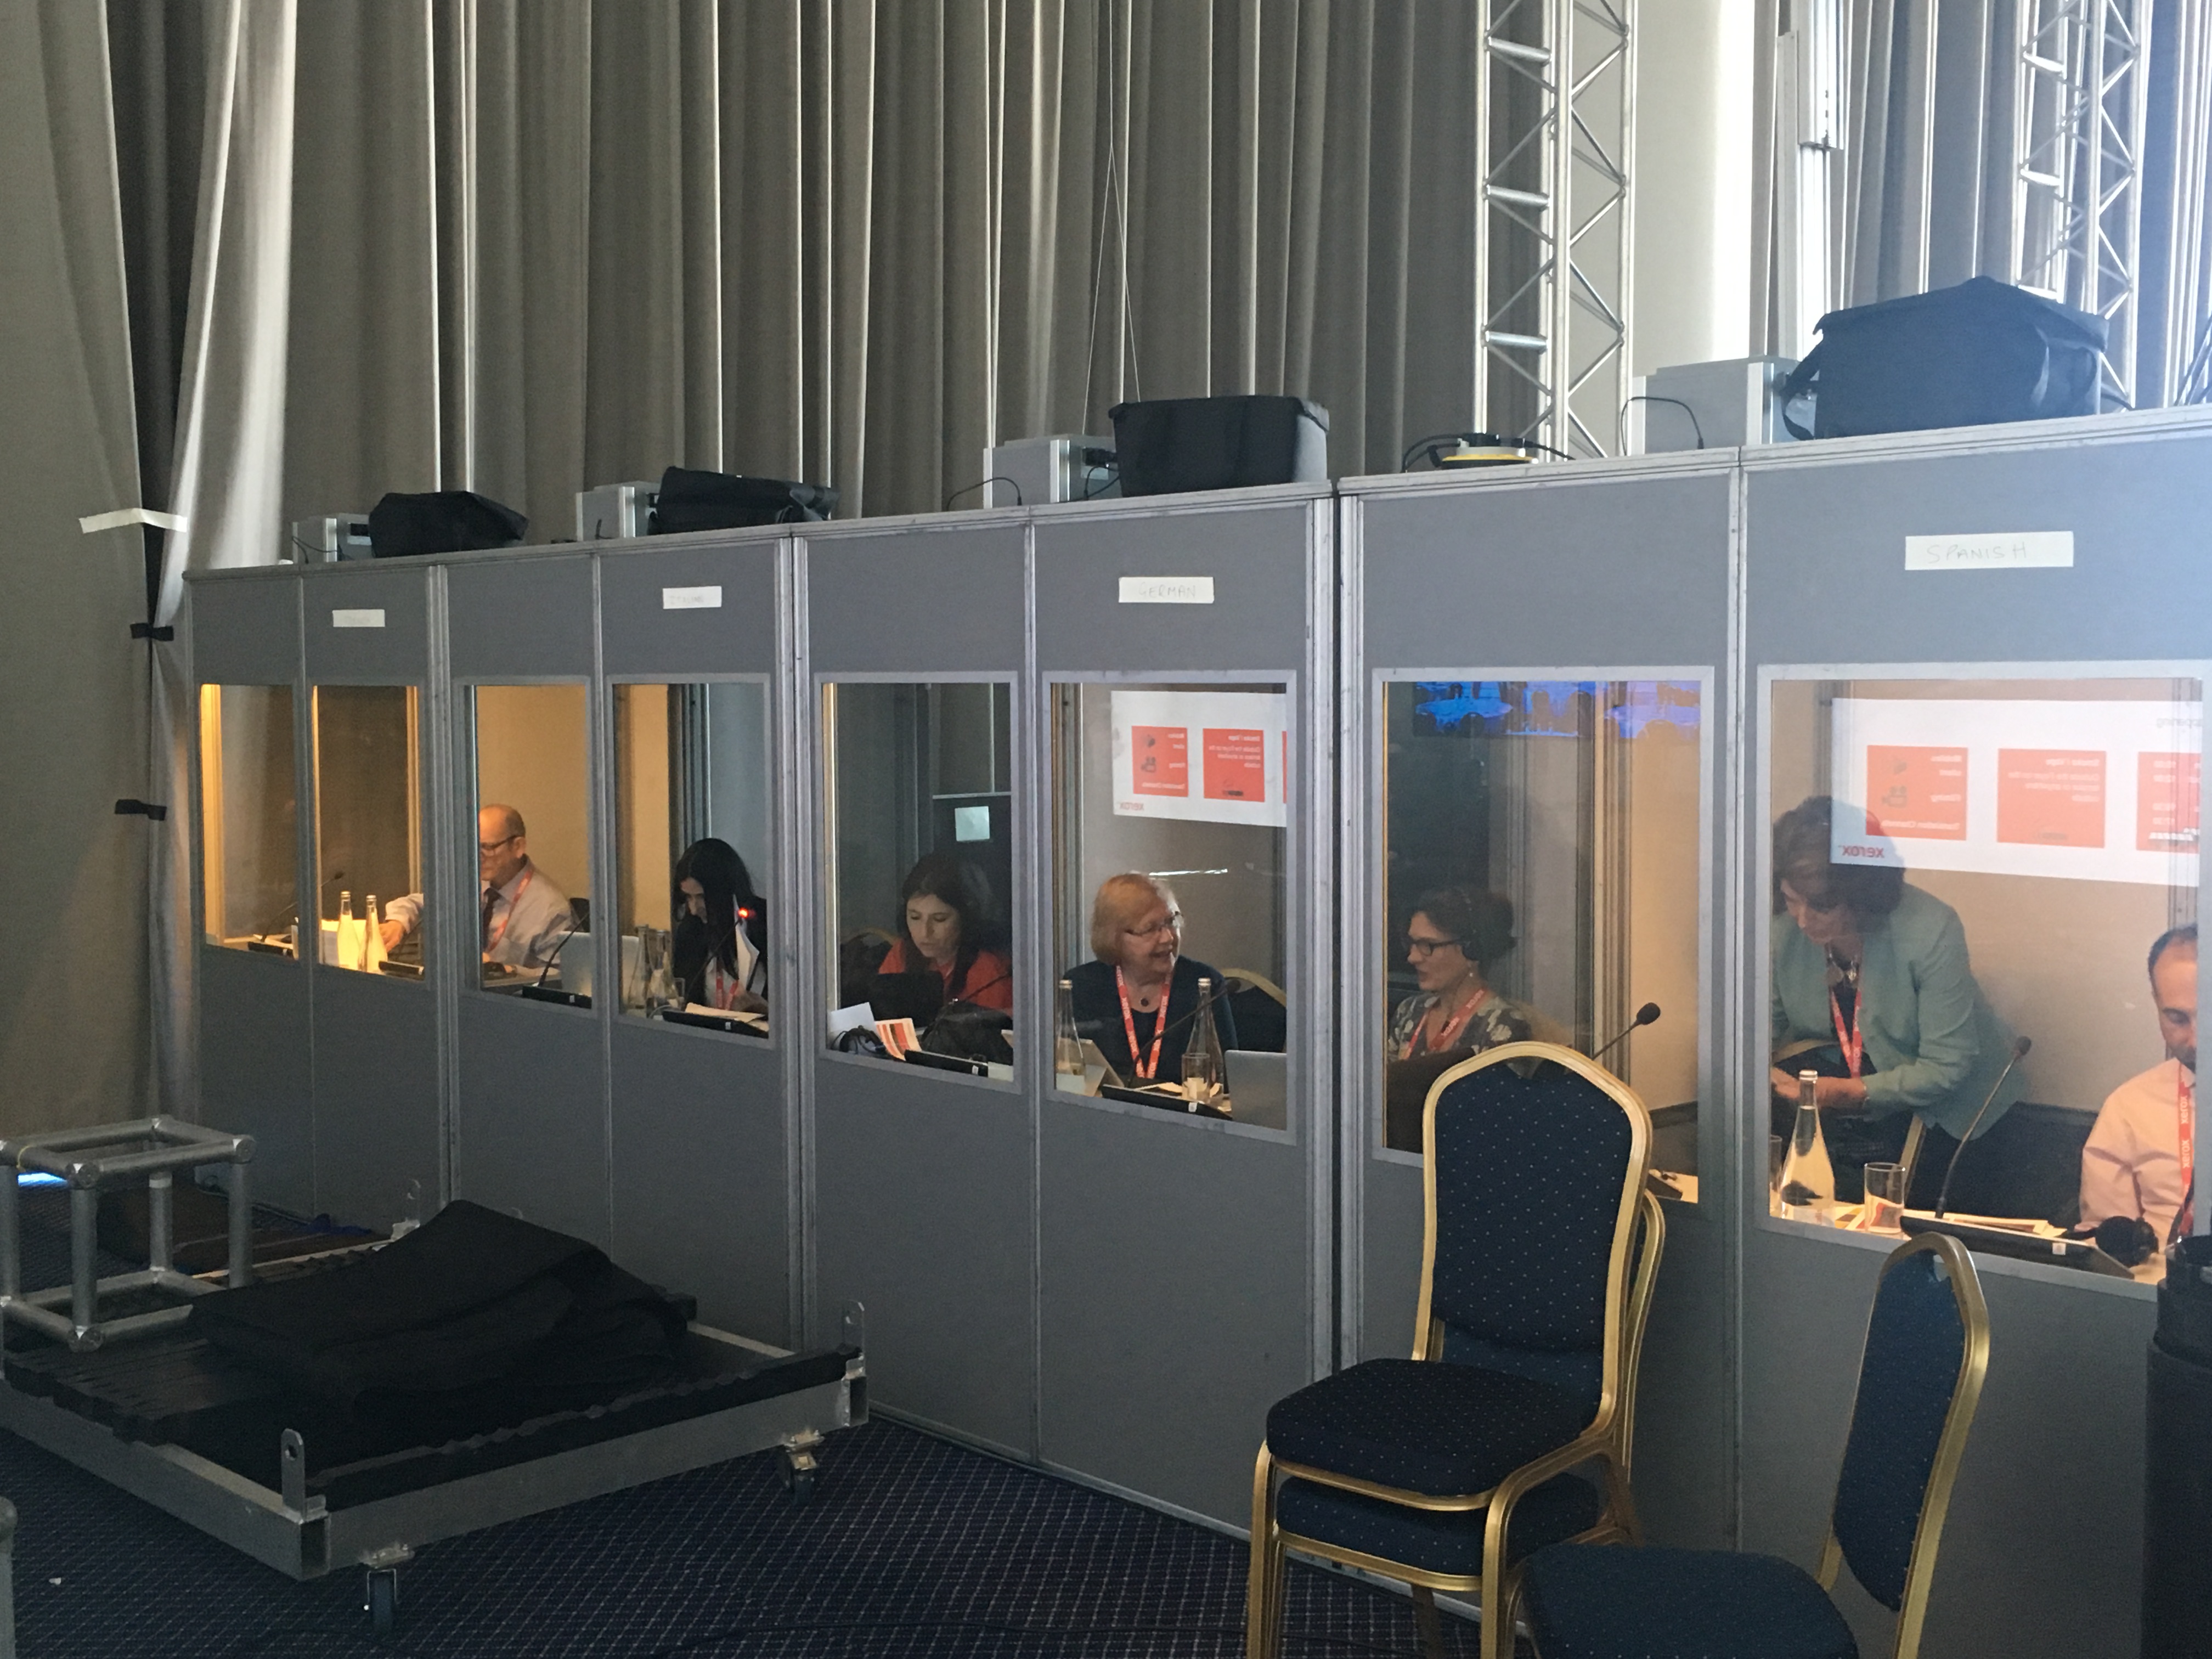 Interpreters at work in soundproof booths backstage at Xerox event in Portugal